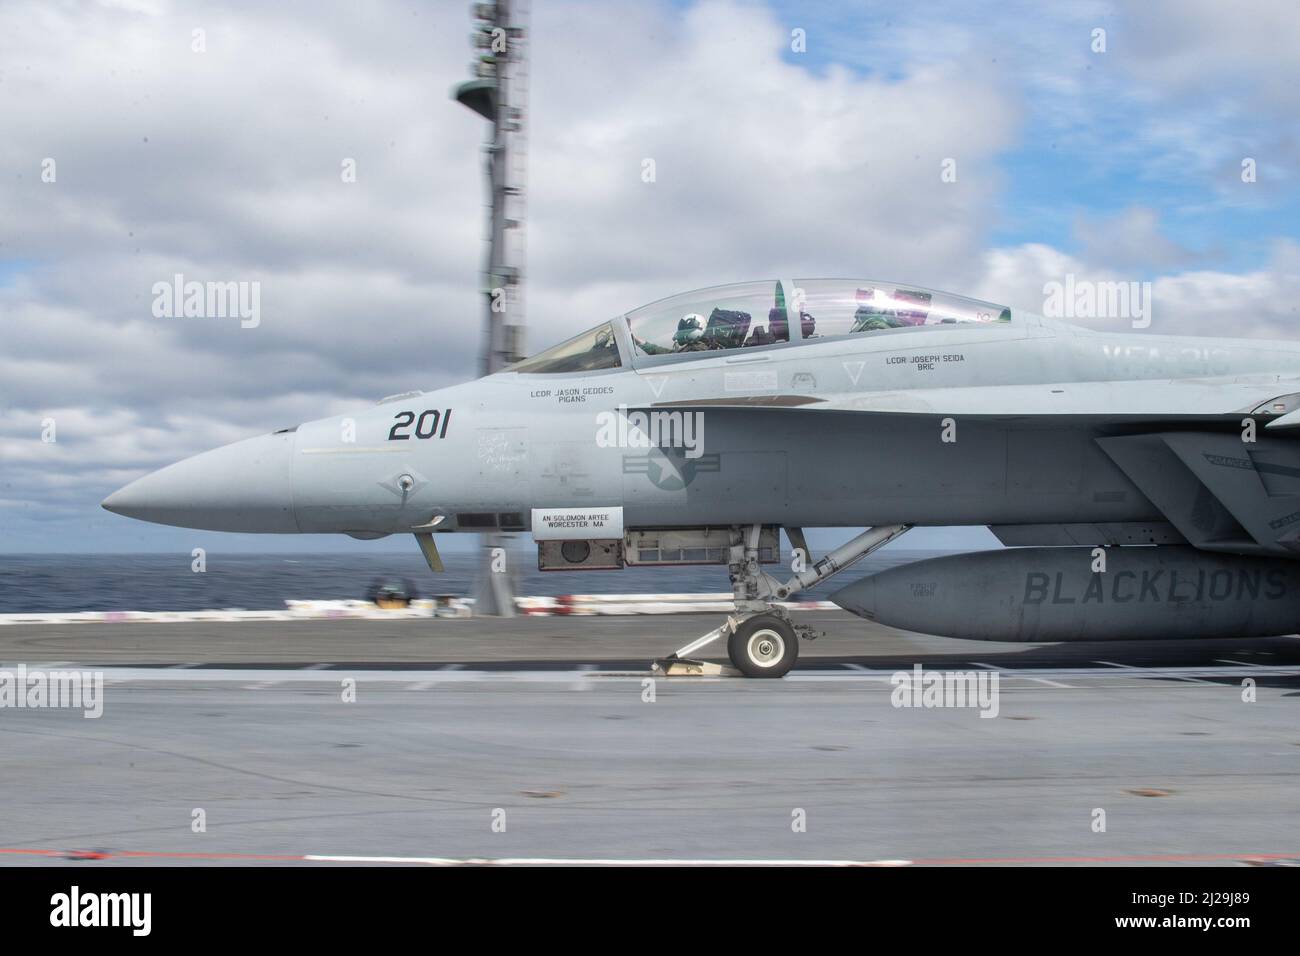 An F/A-18F Super Hornet, attached to the 'Blacklions' of Strike Fighter Squadron (VFA) 213, takes off from USS Gerald R. Ford’s (CVN 78) flight deck, March 29, 2022. Ford is underway in the Atlantic Ocean conducting flight deck certification and air wing carrier qualification as part of the ship’s tailored basic phase prior to operational deployment. (U.S. Navy photo by Mass Communication Specialist 2nd Class Zachary Melvin) Stock Photo